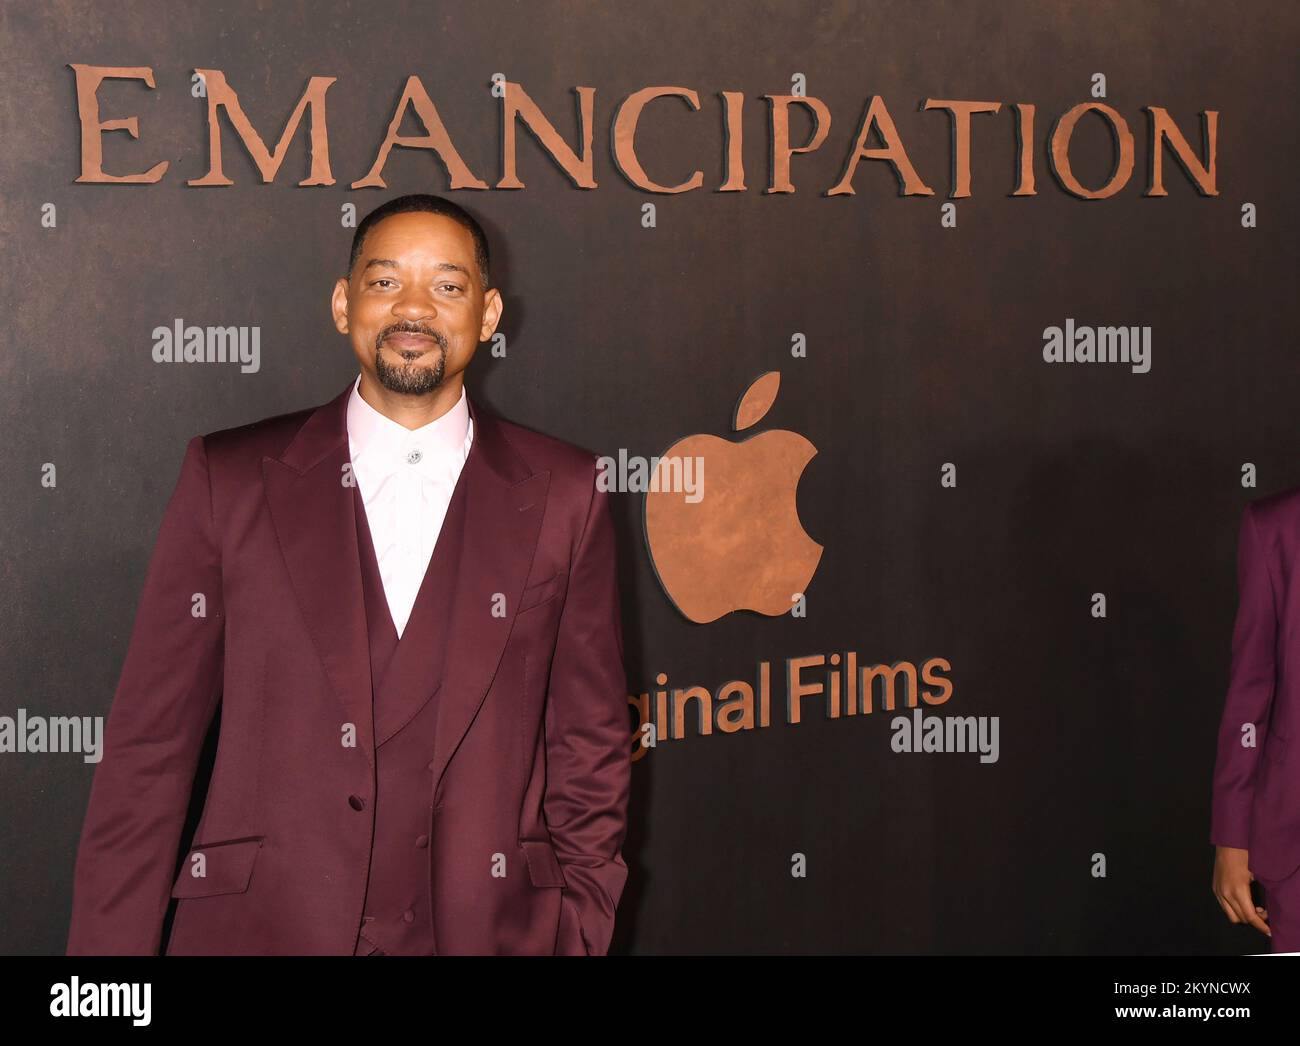 Will Smith's 'Emancipation' Sets 2022 Release, Apple Releases Trailer